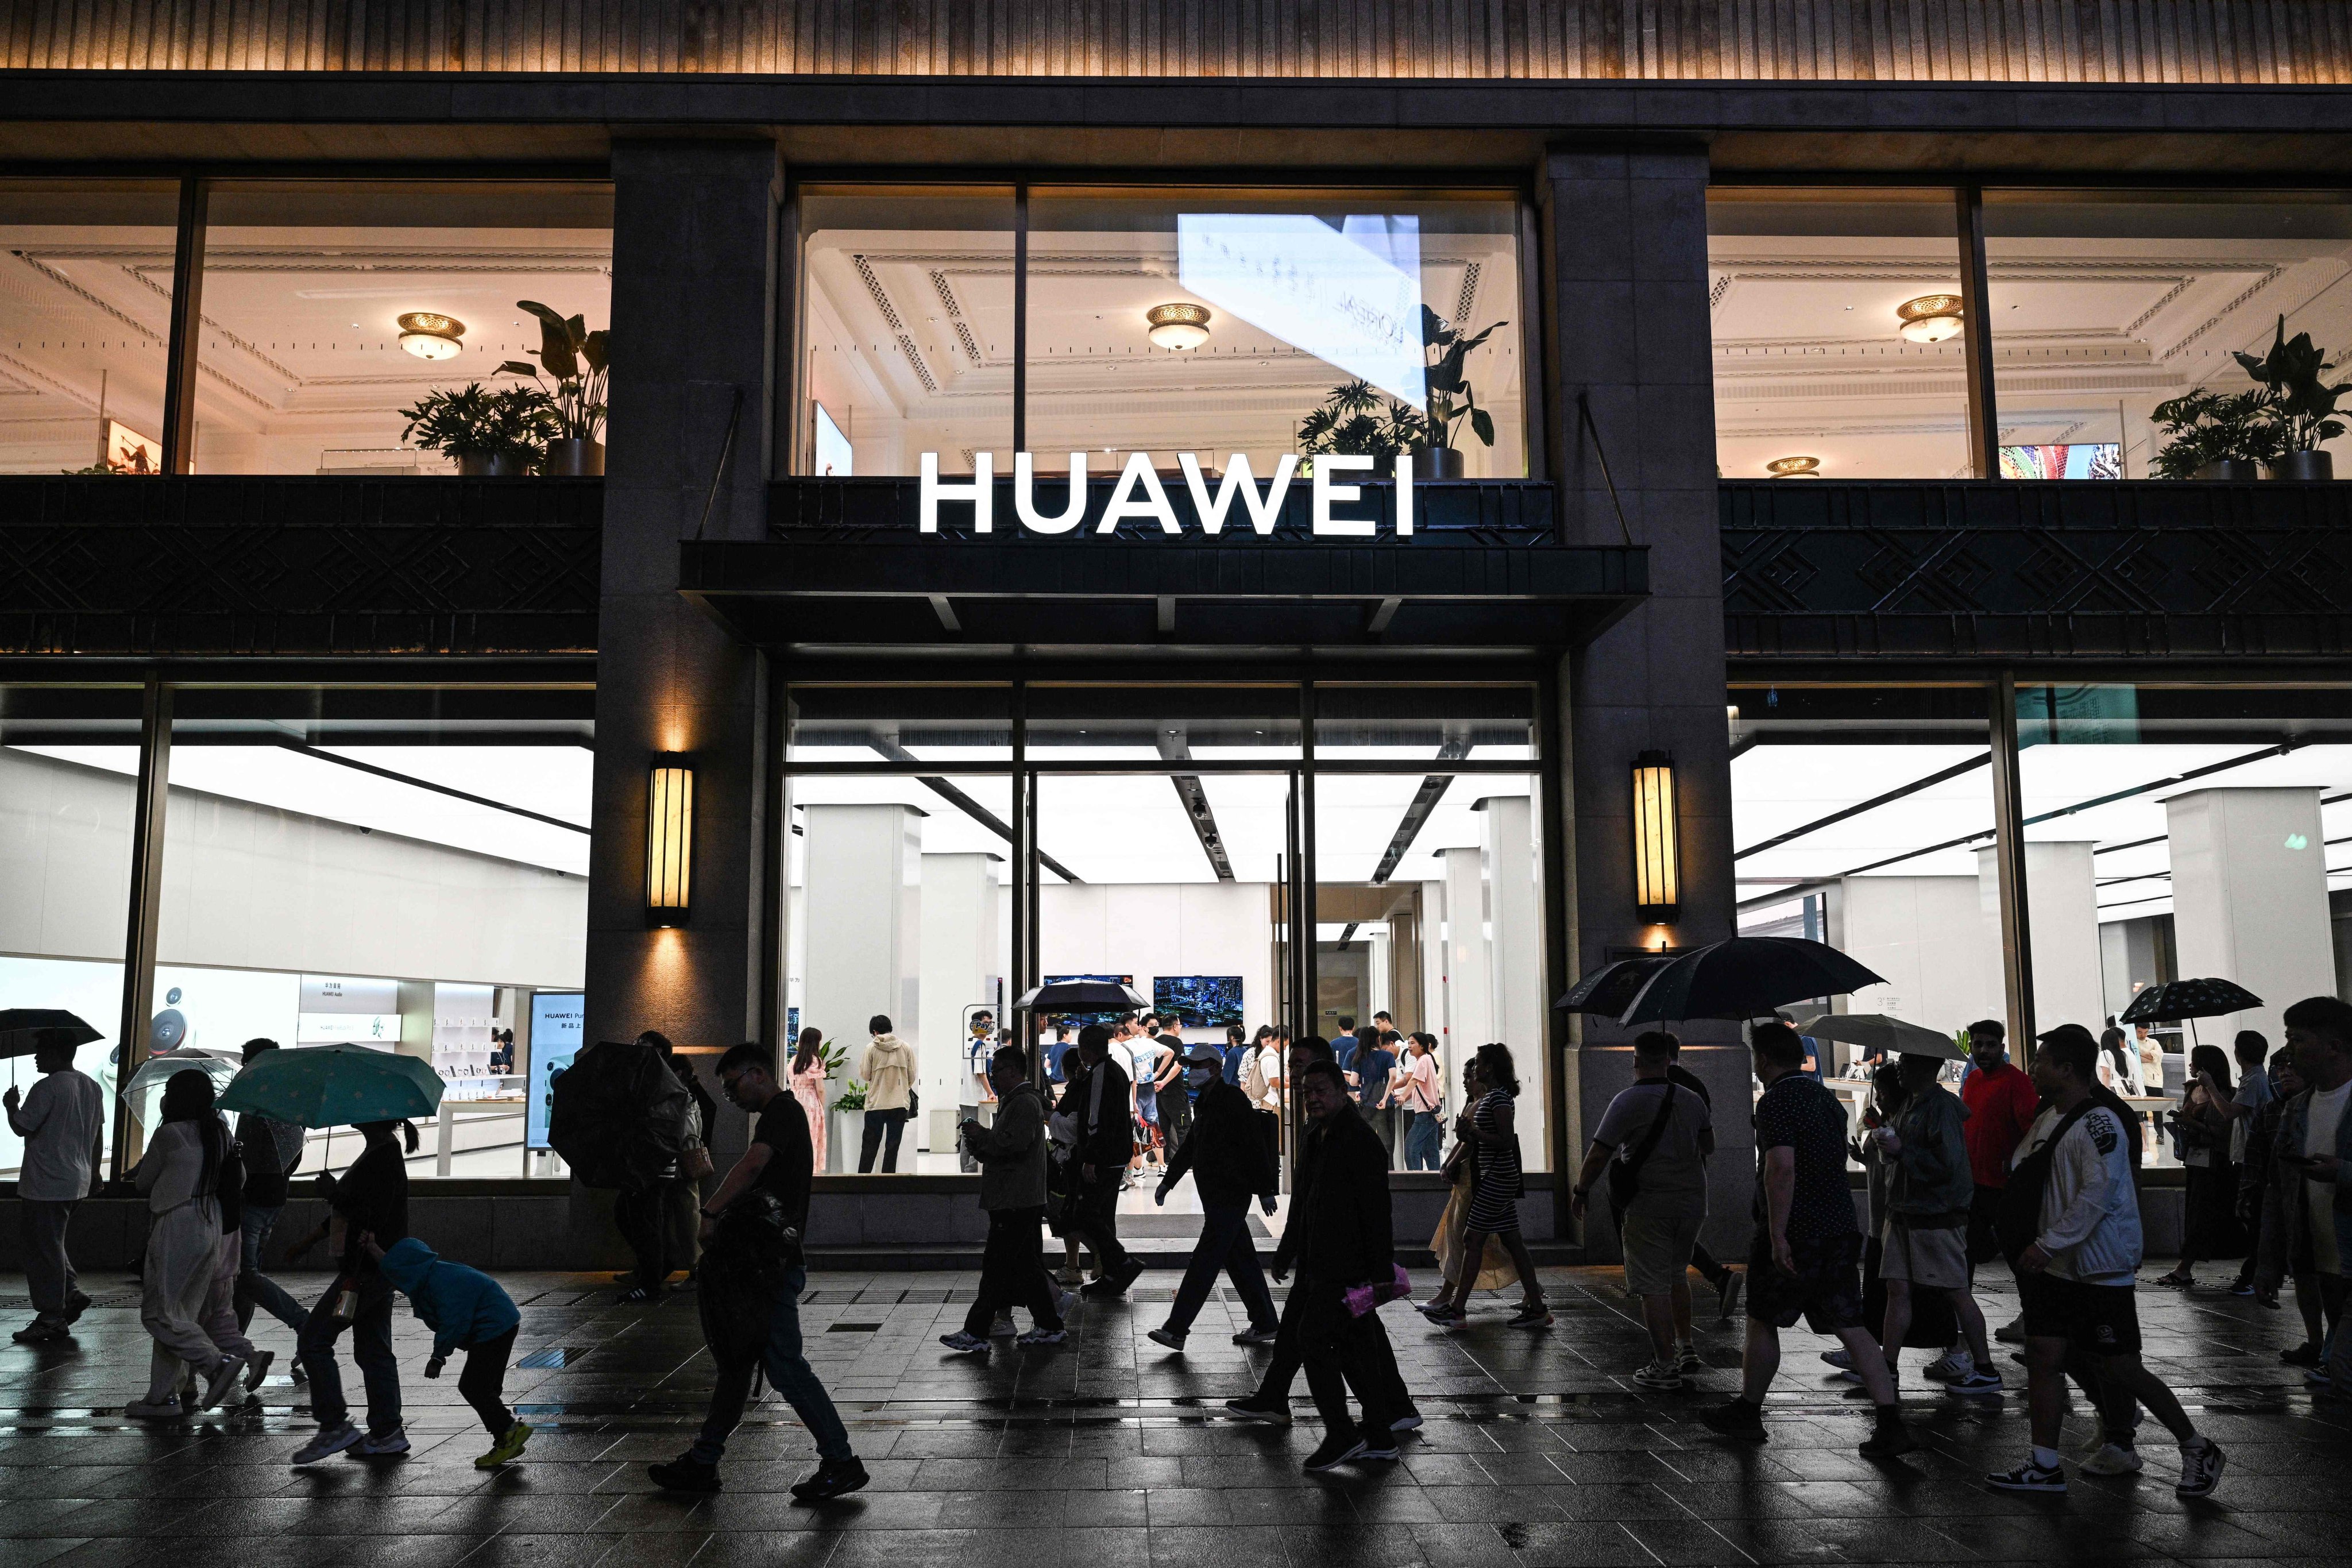 A Huawei shop in the Huangpu district in Shanghai, China. Photo: AFP